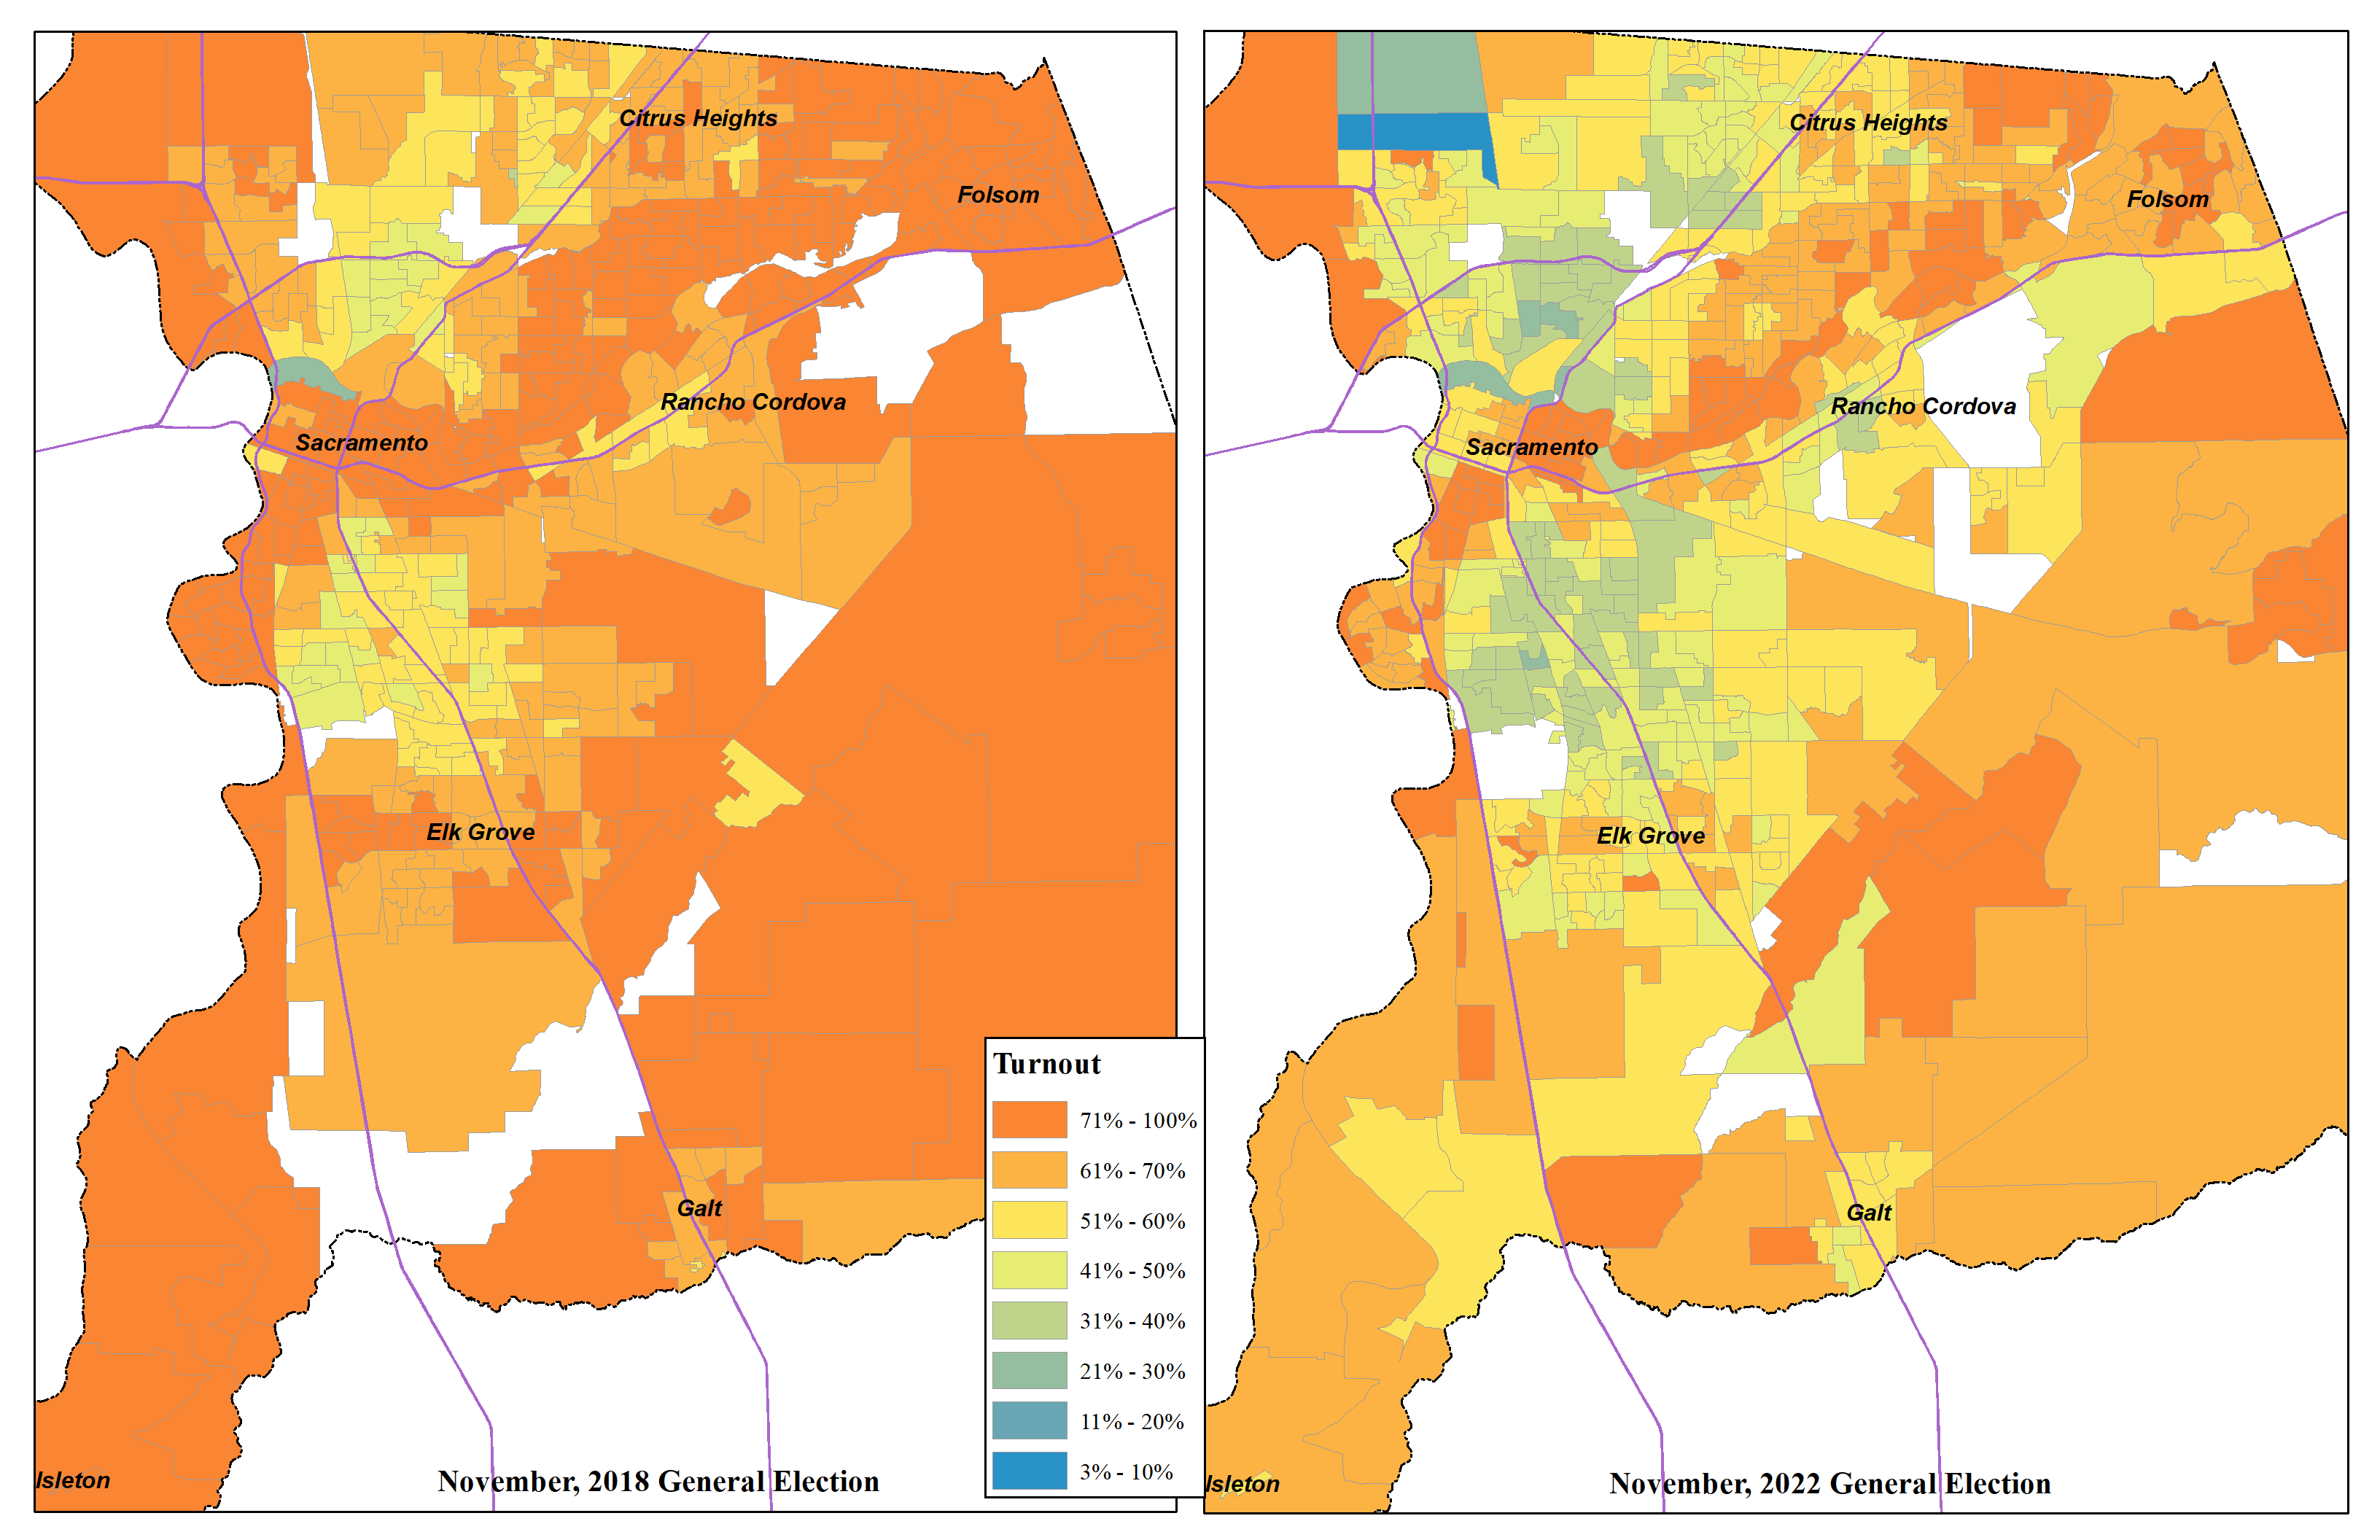 Two maps of Sacramento County with identical extents are side by side. The map on the left is titled “November 2018 General Election”, and the map on the right is titled “November 2022 General Election.” A legend in the center titled “Turnout” shows an eight-color scale from a high value of 71% to 100% colored in orange on top, transitioning to yellow and to green and down to a low value of 3% to 10% colored in blue on the bottom. Both maps show the election precincts throughout Sacramento County, and each precinct is colored by its turnout value for that election. Freeways are drawn in purple, and cities are labeled in black.  On the 2018 Map on the left, most precincts are colored in orange indicating the 61% to 100% turnout values, with most of North Sacramento, South Sacramento, and parts of Rio Linda, North Highlands and Rancho Cordova dropping down into the yellow colors indicating 41% to 60% turnout.  On the 2022 Map on the right, fewer precincts are in the higher 61% to 100% turnout values, limited mostly to precincts in Land Park, East Sacramento, Carmichael, Fair Oaks, Orangevale, Folsom, and rural areas. Most precincts are colored yellow indicating between 41% to 60% turnout values. Most precincts in South Sacramento, and some precincts in North Sacramento and North Highlands drop down to the 21% to 40% turnout values colored in green.  